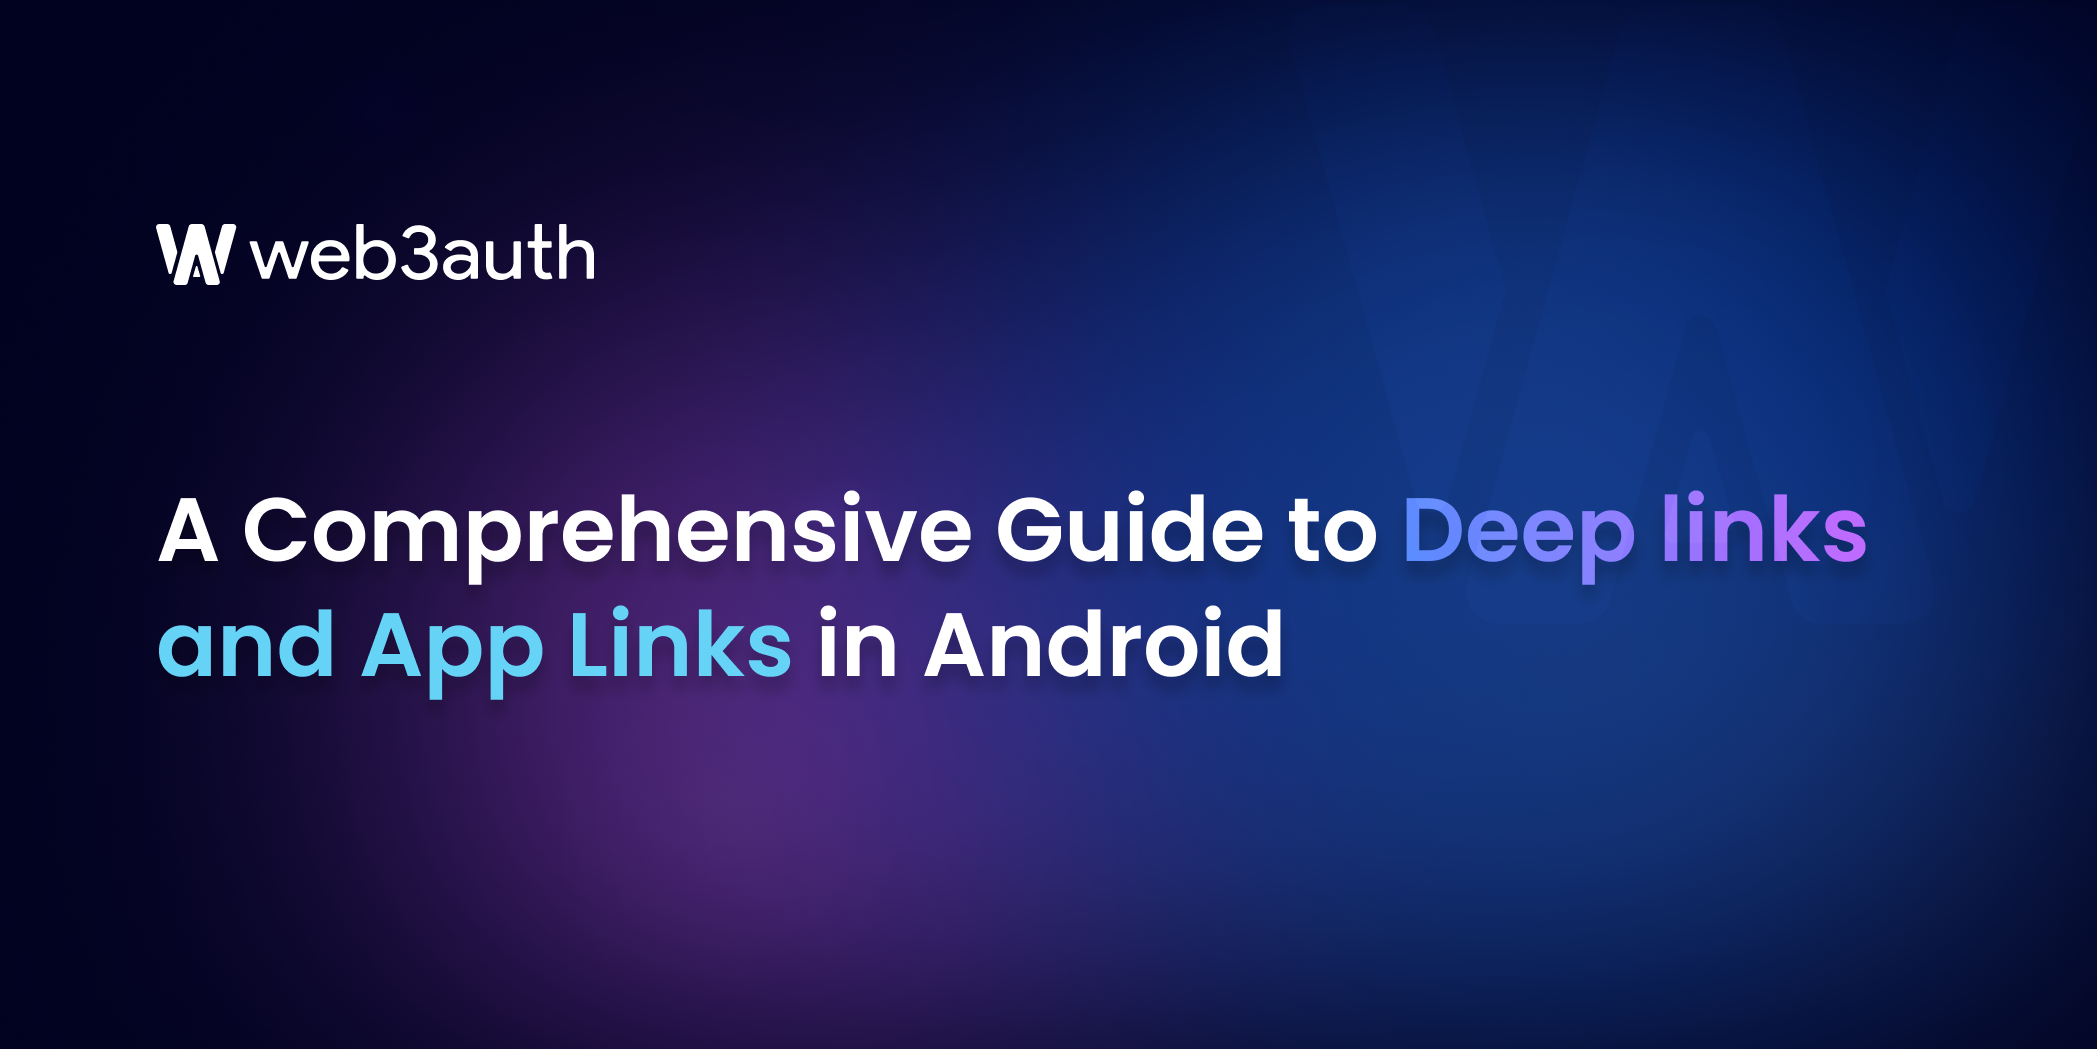 A Comprehensive Guide to Deep links and App Links in Android, Documentation